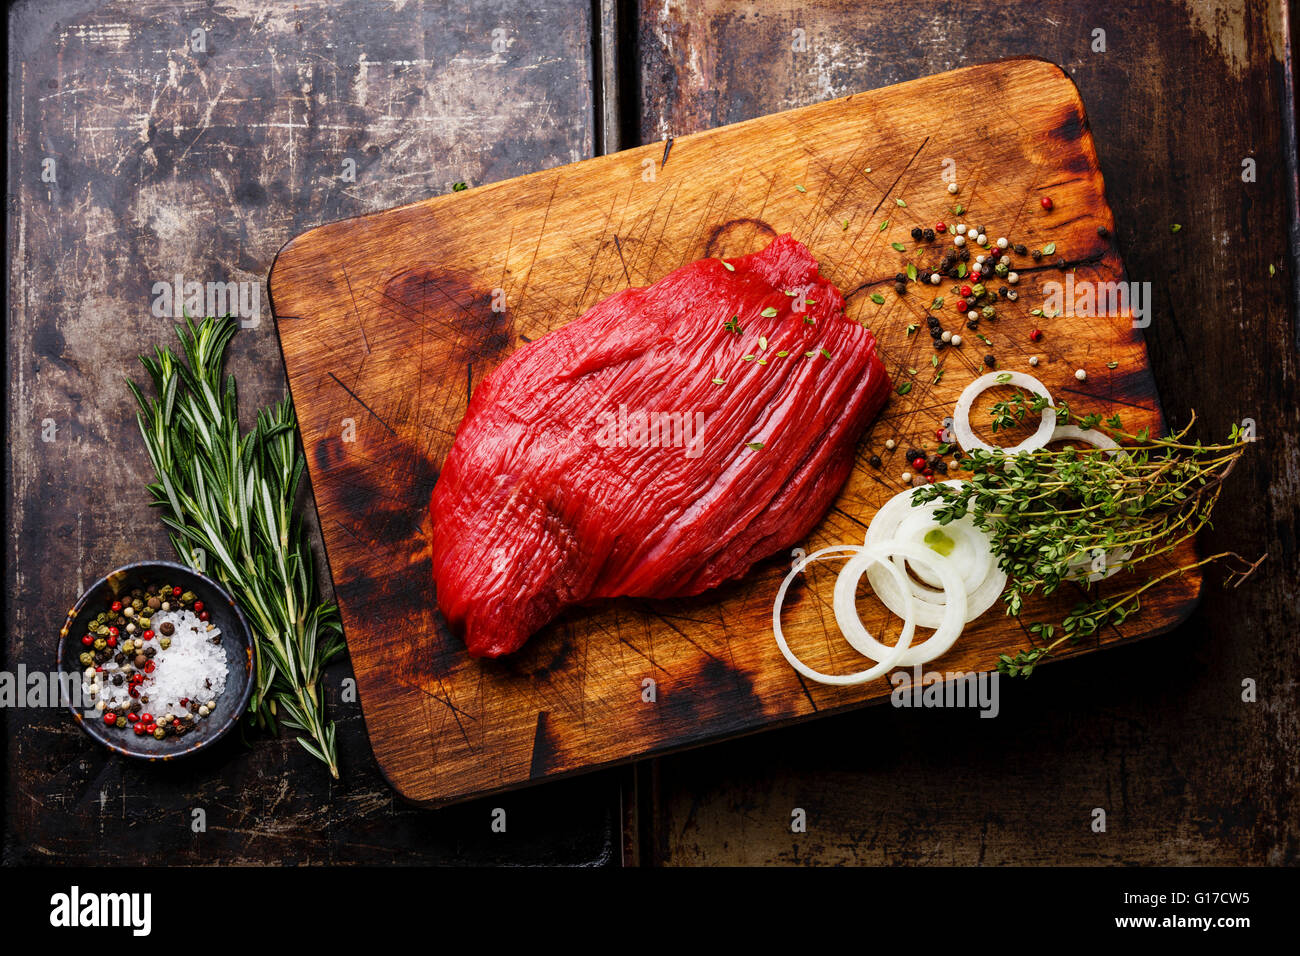 Raw fresh meat filet and condiments on dark background Stock Photo